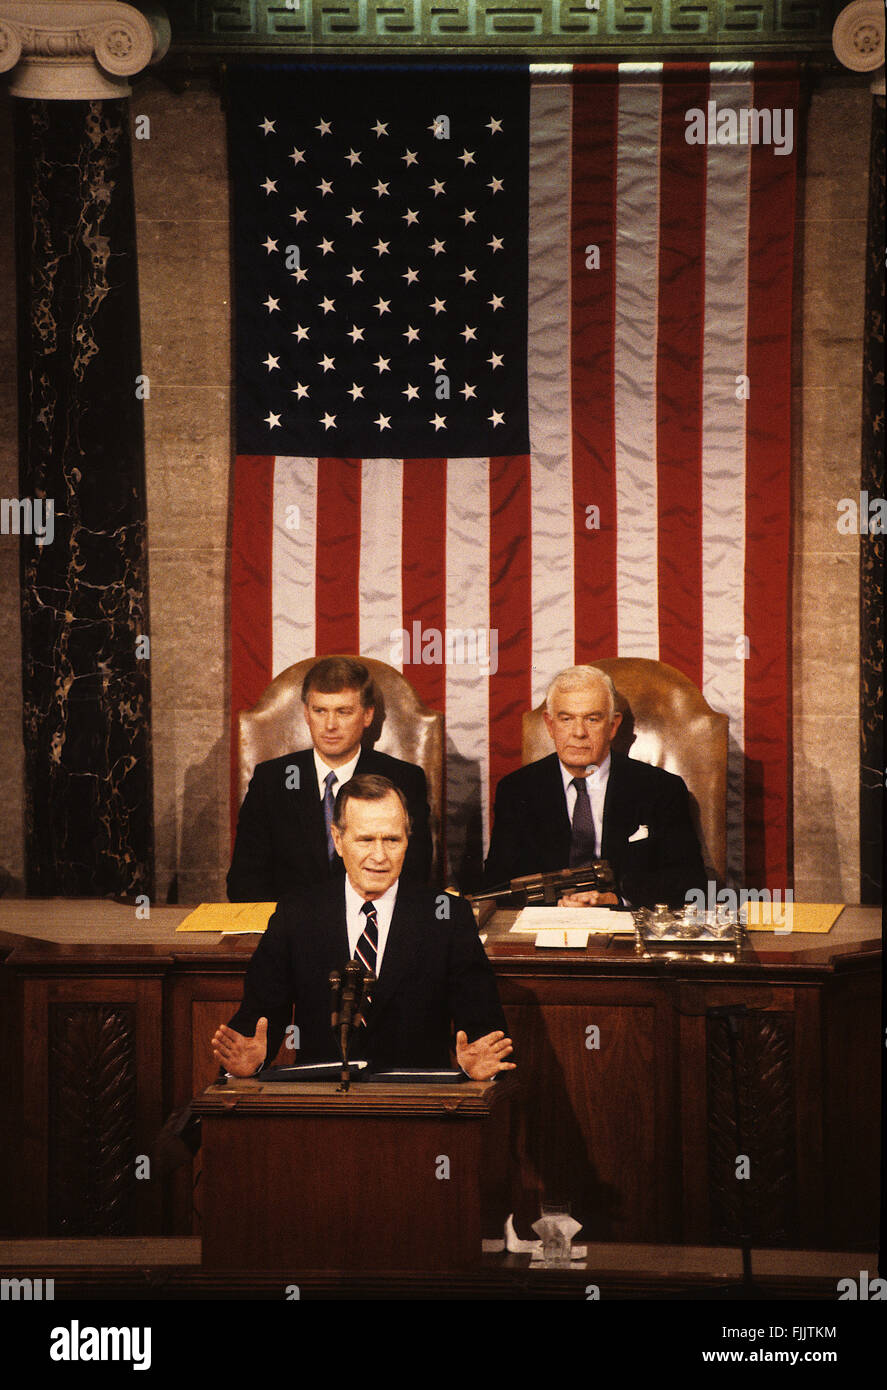 Washington, DC., USA, 31st January,  1990 President George H.W. Bush delivers his State of the Union Address to the 101st Congress. President Bush spoke of the changes in the world in the last year: the restoration of democracy to Panama, the freeing of Poland and Czechoslovakia from Communist control, and the fall of the Berlin wall. He also talked about proposed education policy and about the U.S. economy and taxes. Seated behind him is Speaker of the House Thomas Foley and Vice President Dan Quayle   Credit: Mark Reinstein Stock Photo